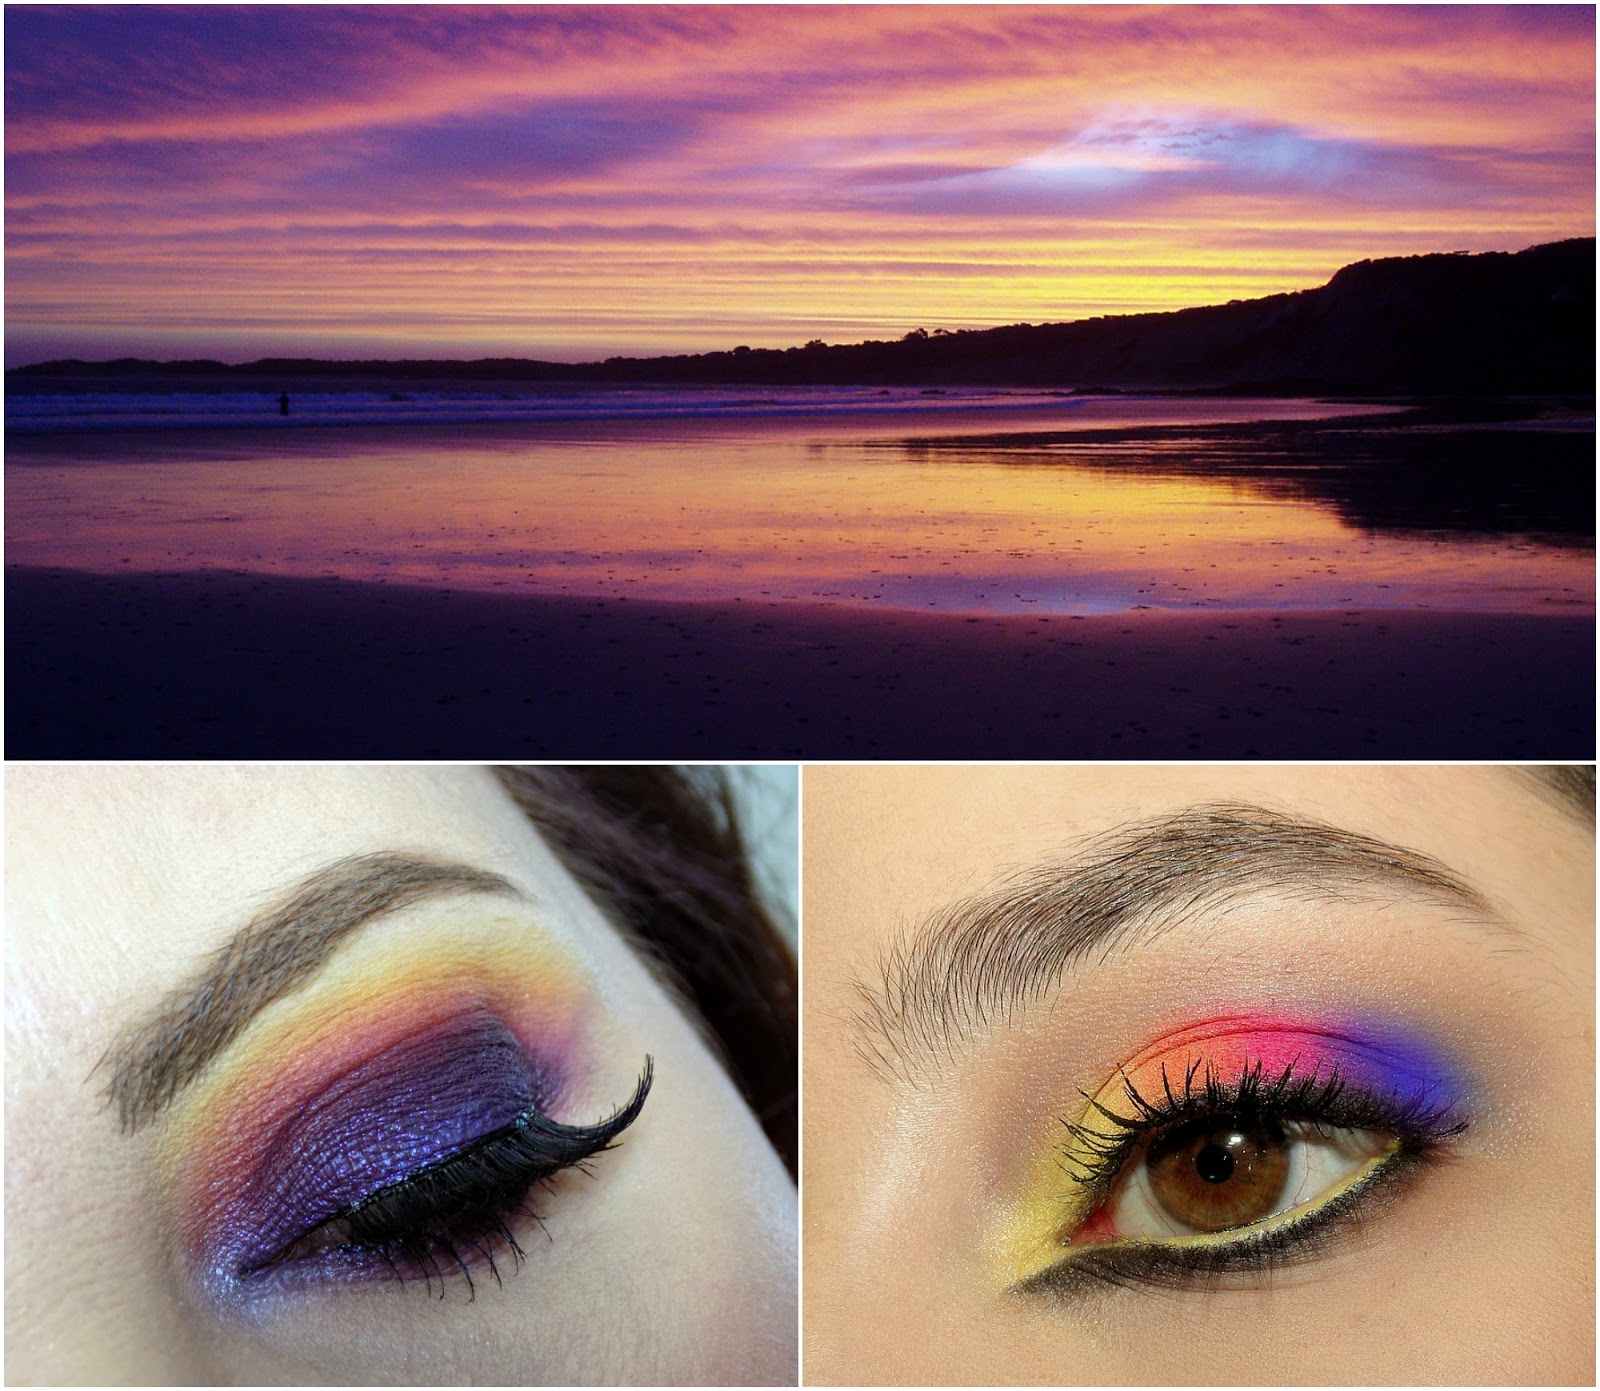 Sunset inspired makeup look